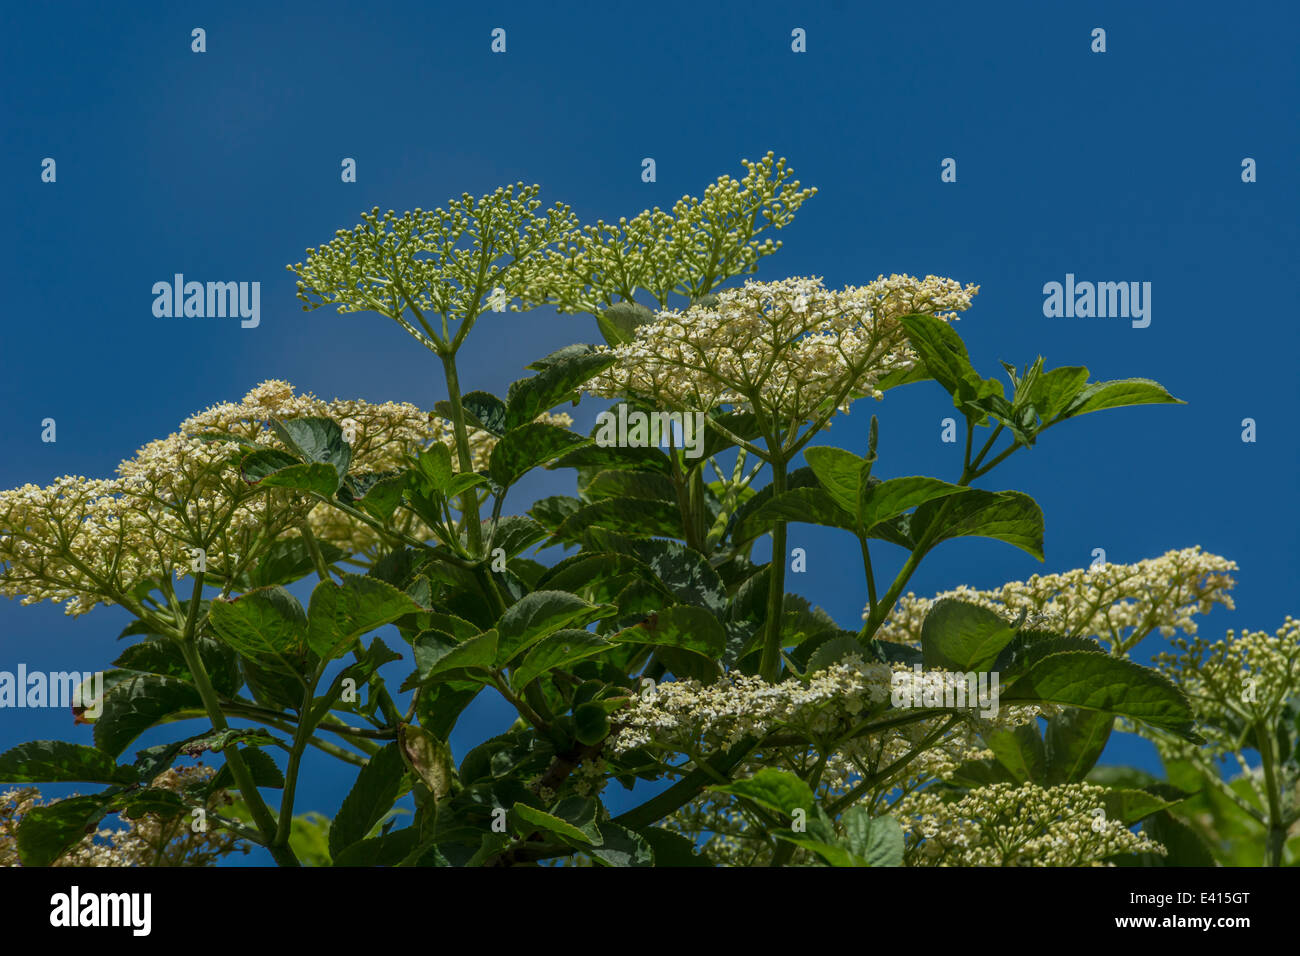 Common Elder / Sambucus nigra flowers and flowerbuds against blue skies. Foraging and dining on the wild concept. Stock Photo